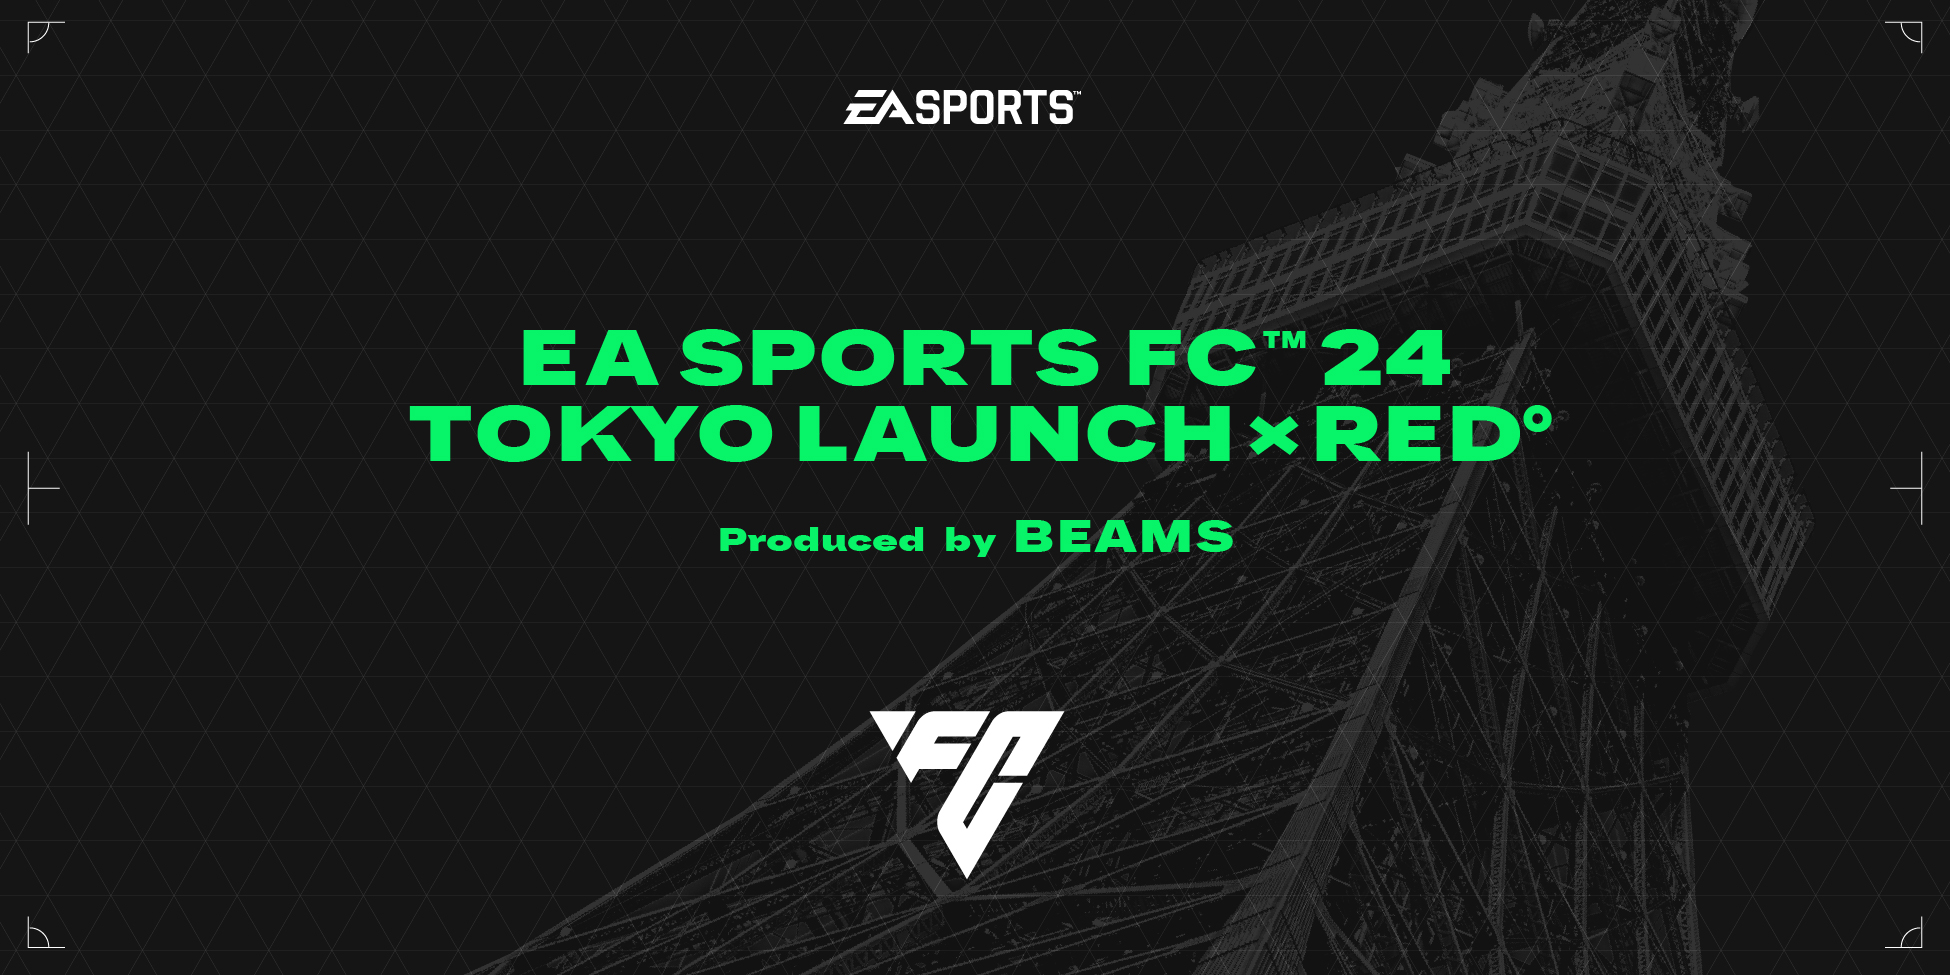 EA SPORTS FC™ 24 Tokyo Launch × RED° produced by BEAMS | RED 